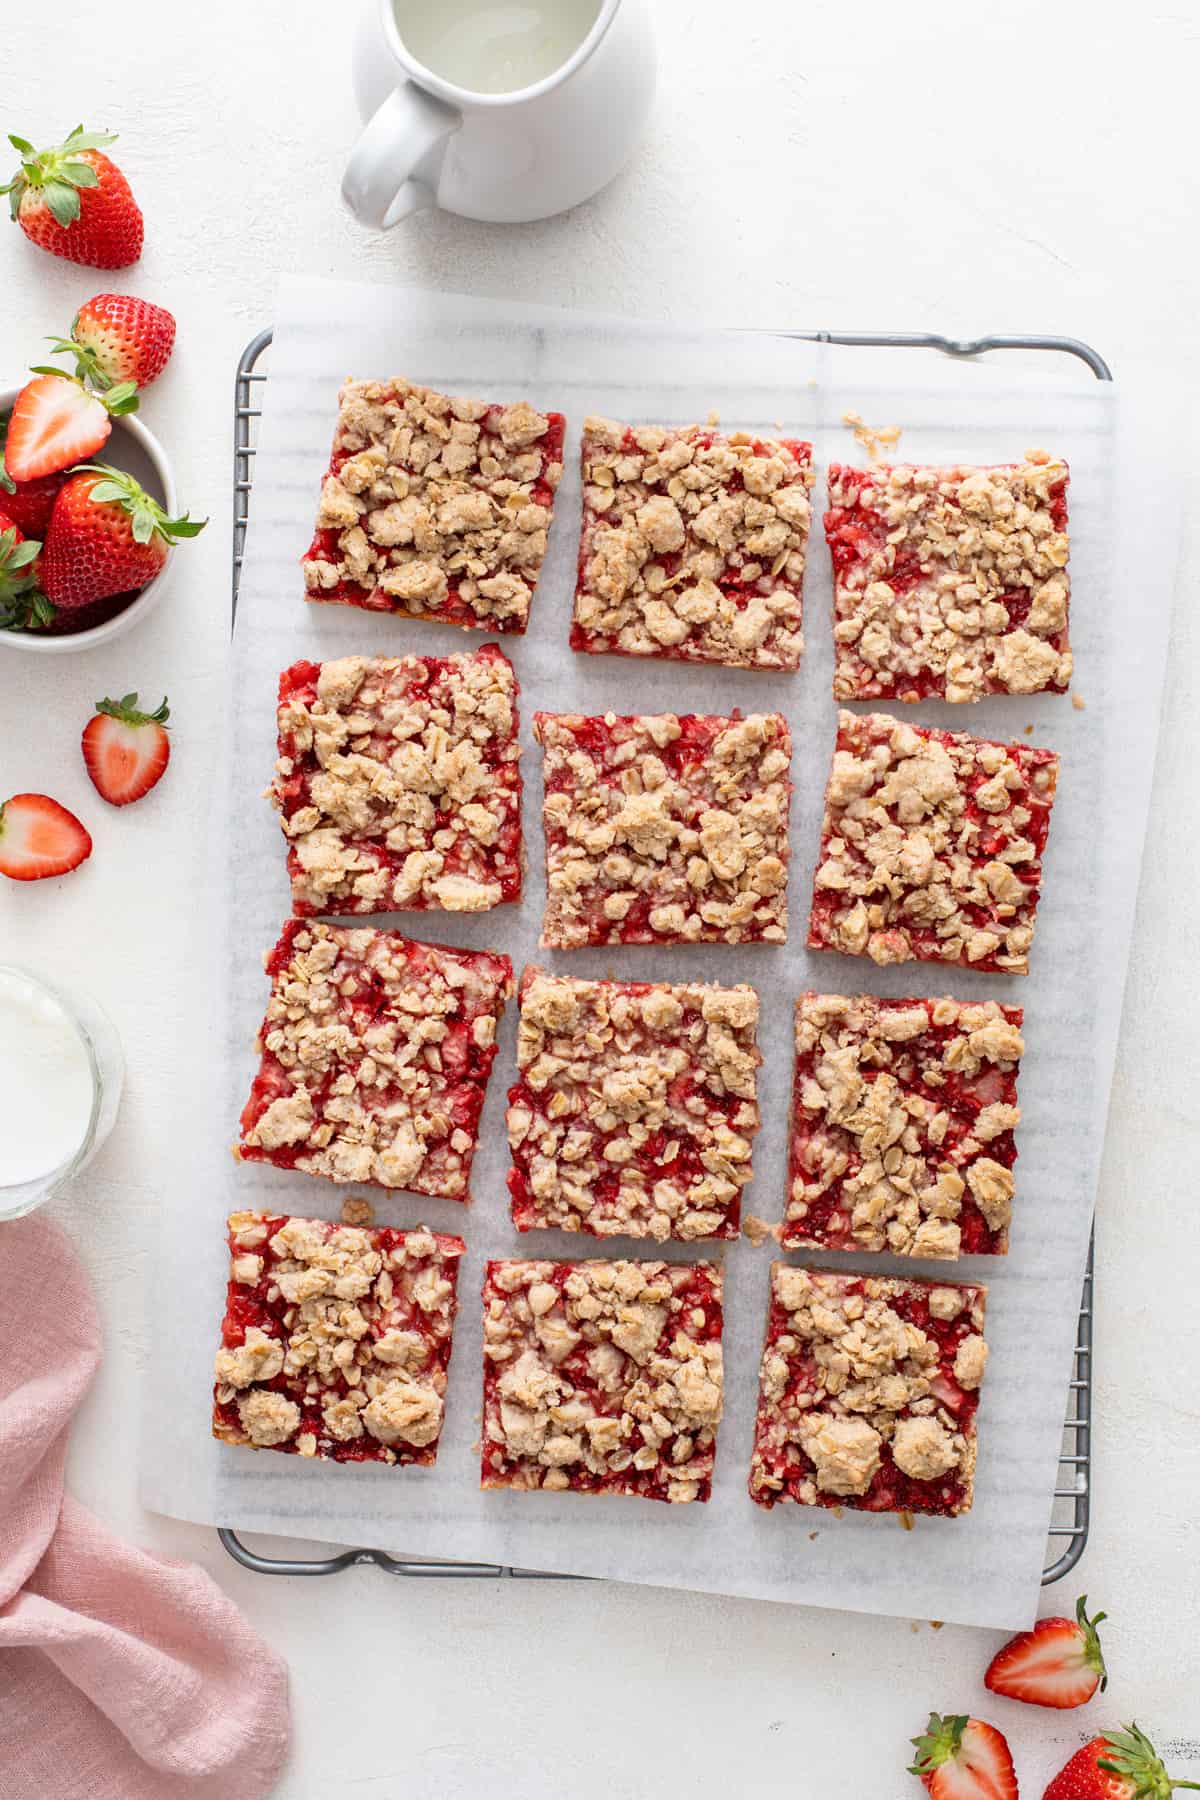 Overhead view of sliced strawberry oatmeal bars on a wire rack.